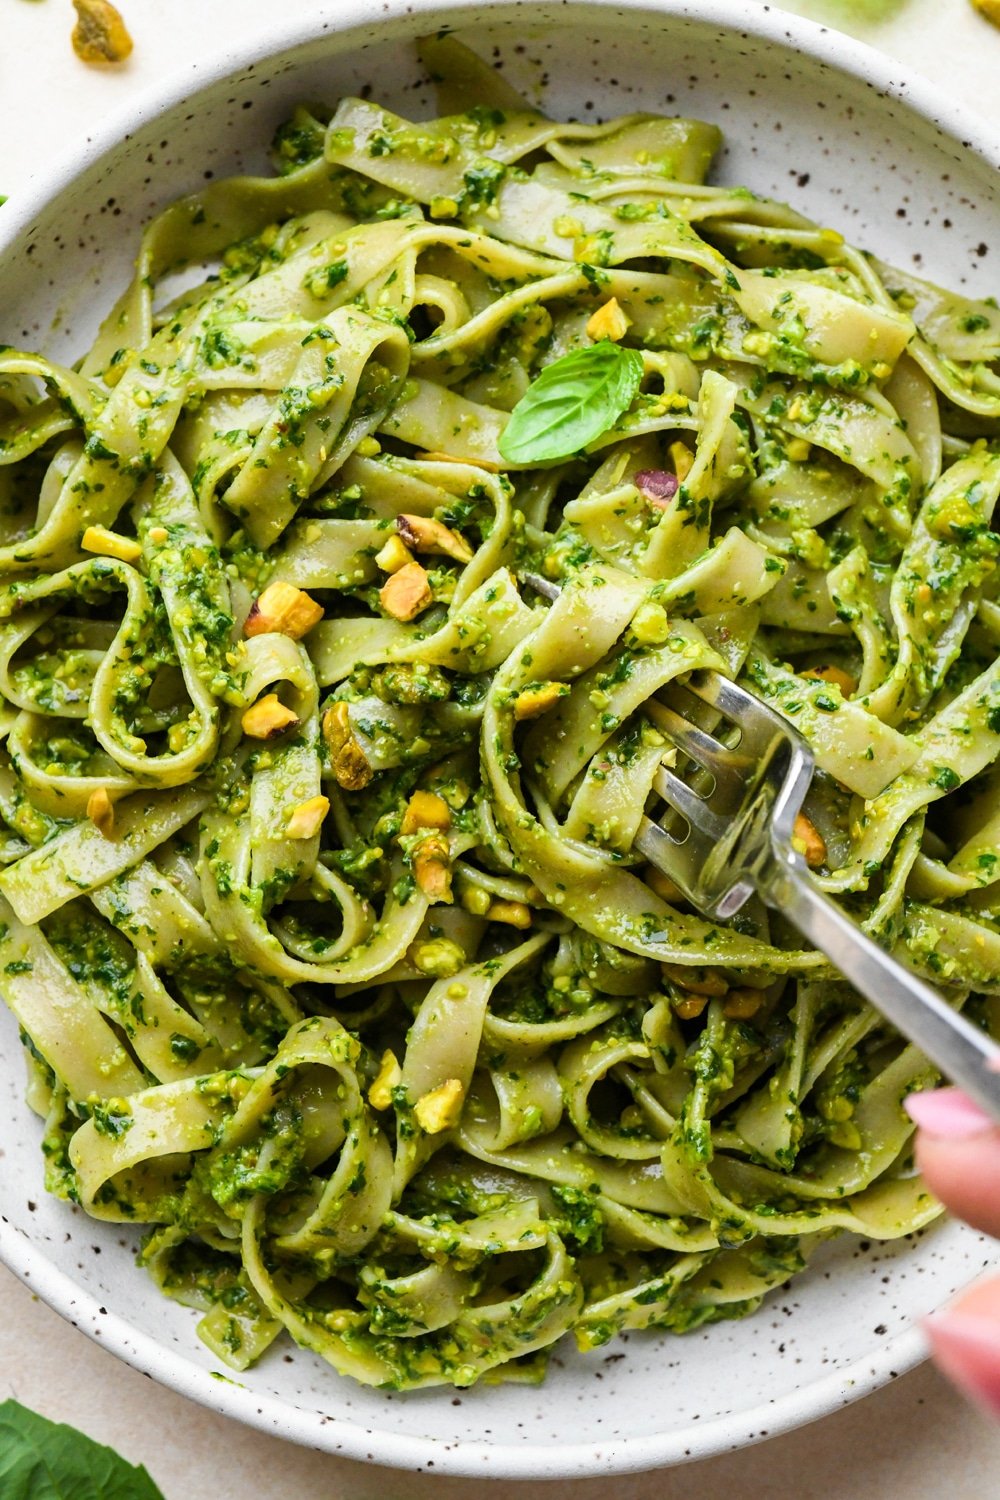 Pistachio pesto tossed with pasta in a shallow ceramic pasta bowl, topped with chopped pistachios and fresh basil leaves.